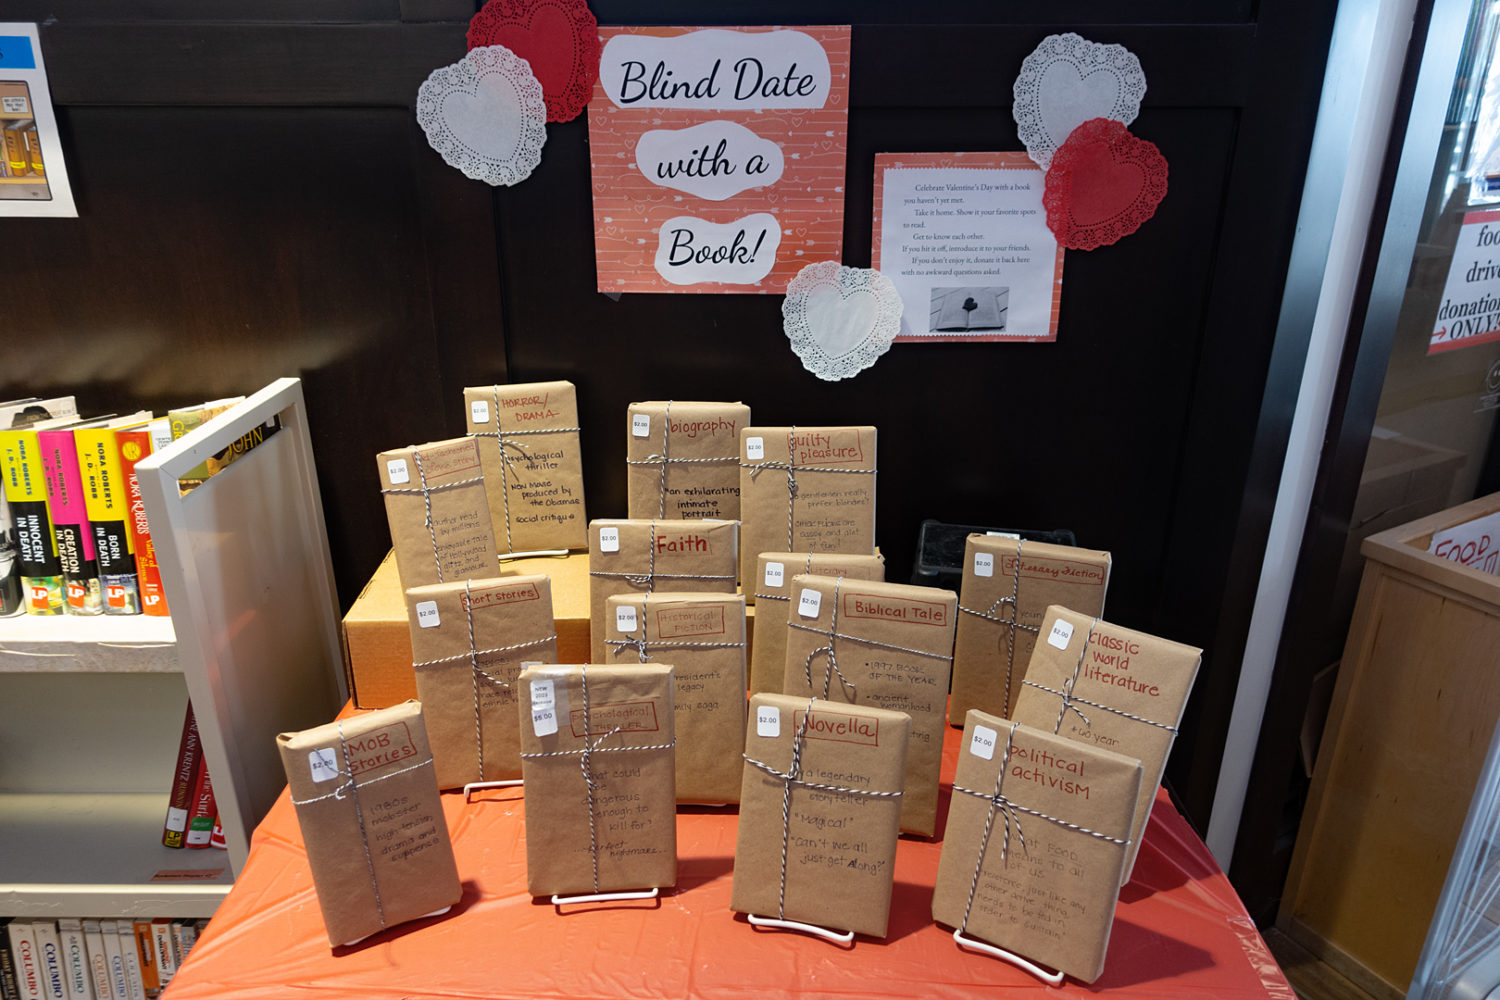 "Blind Date with a Book" display at the Irondequoit Library